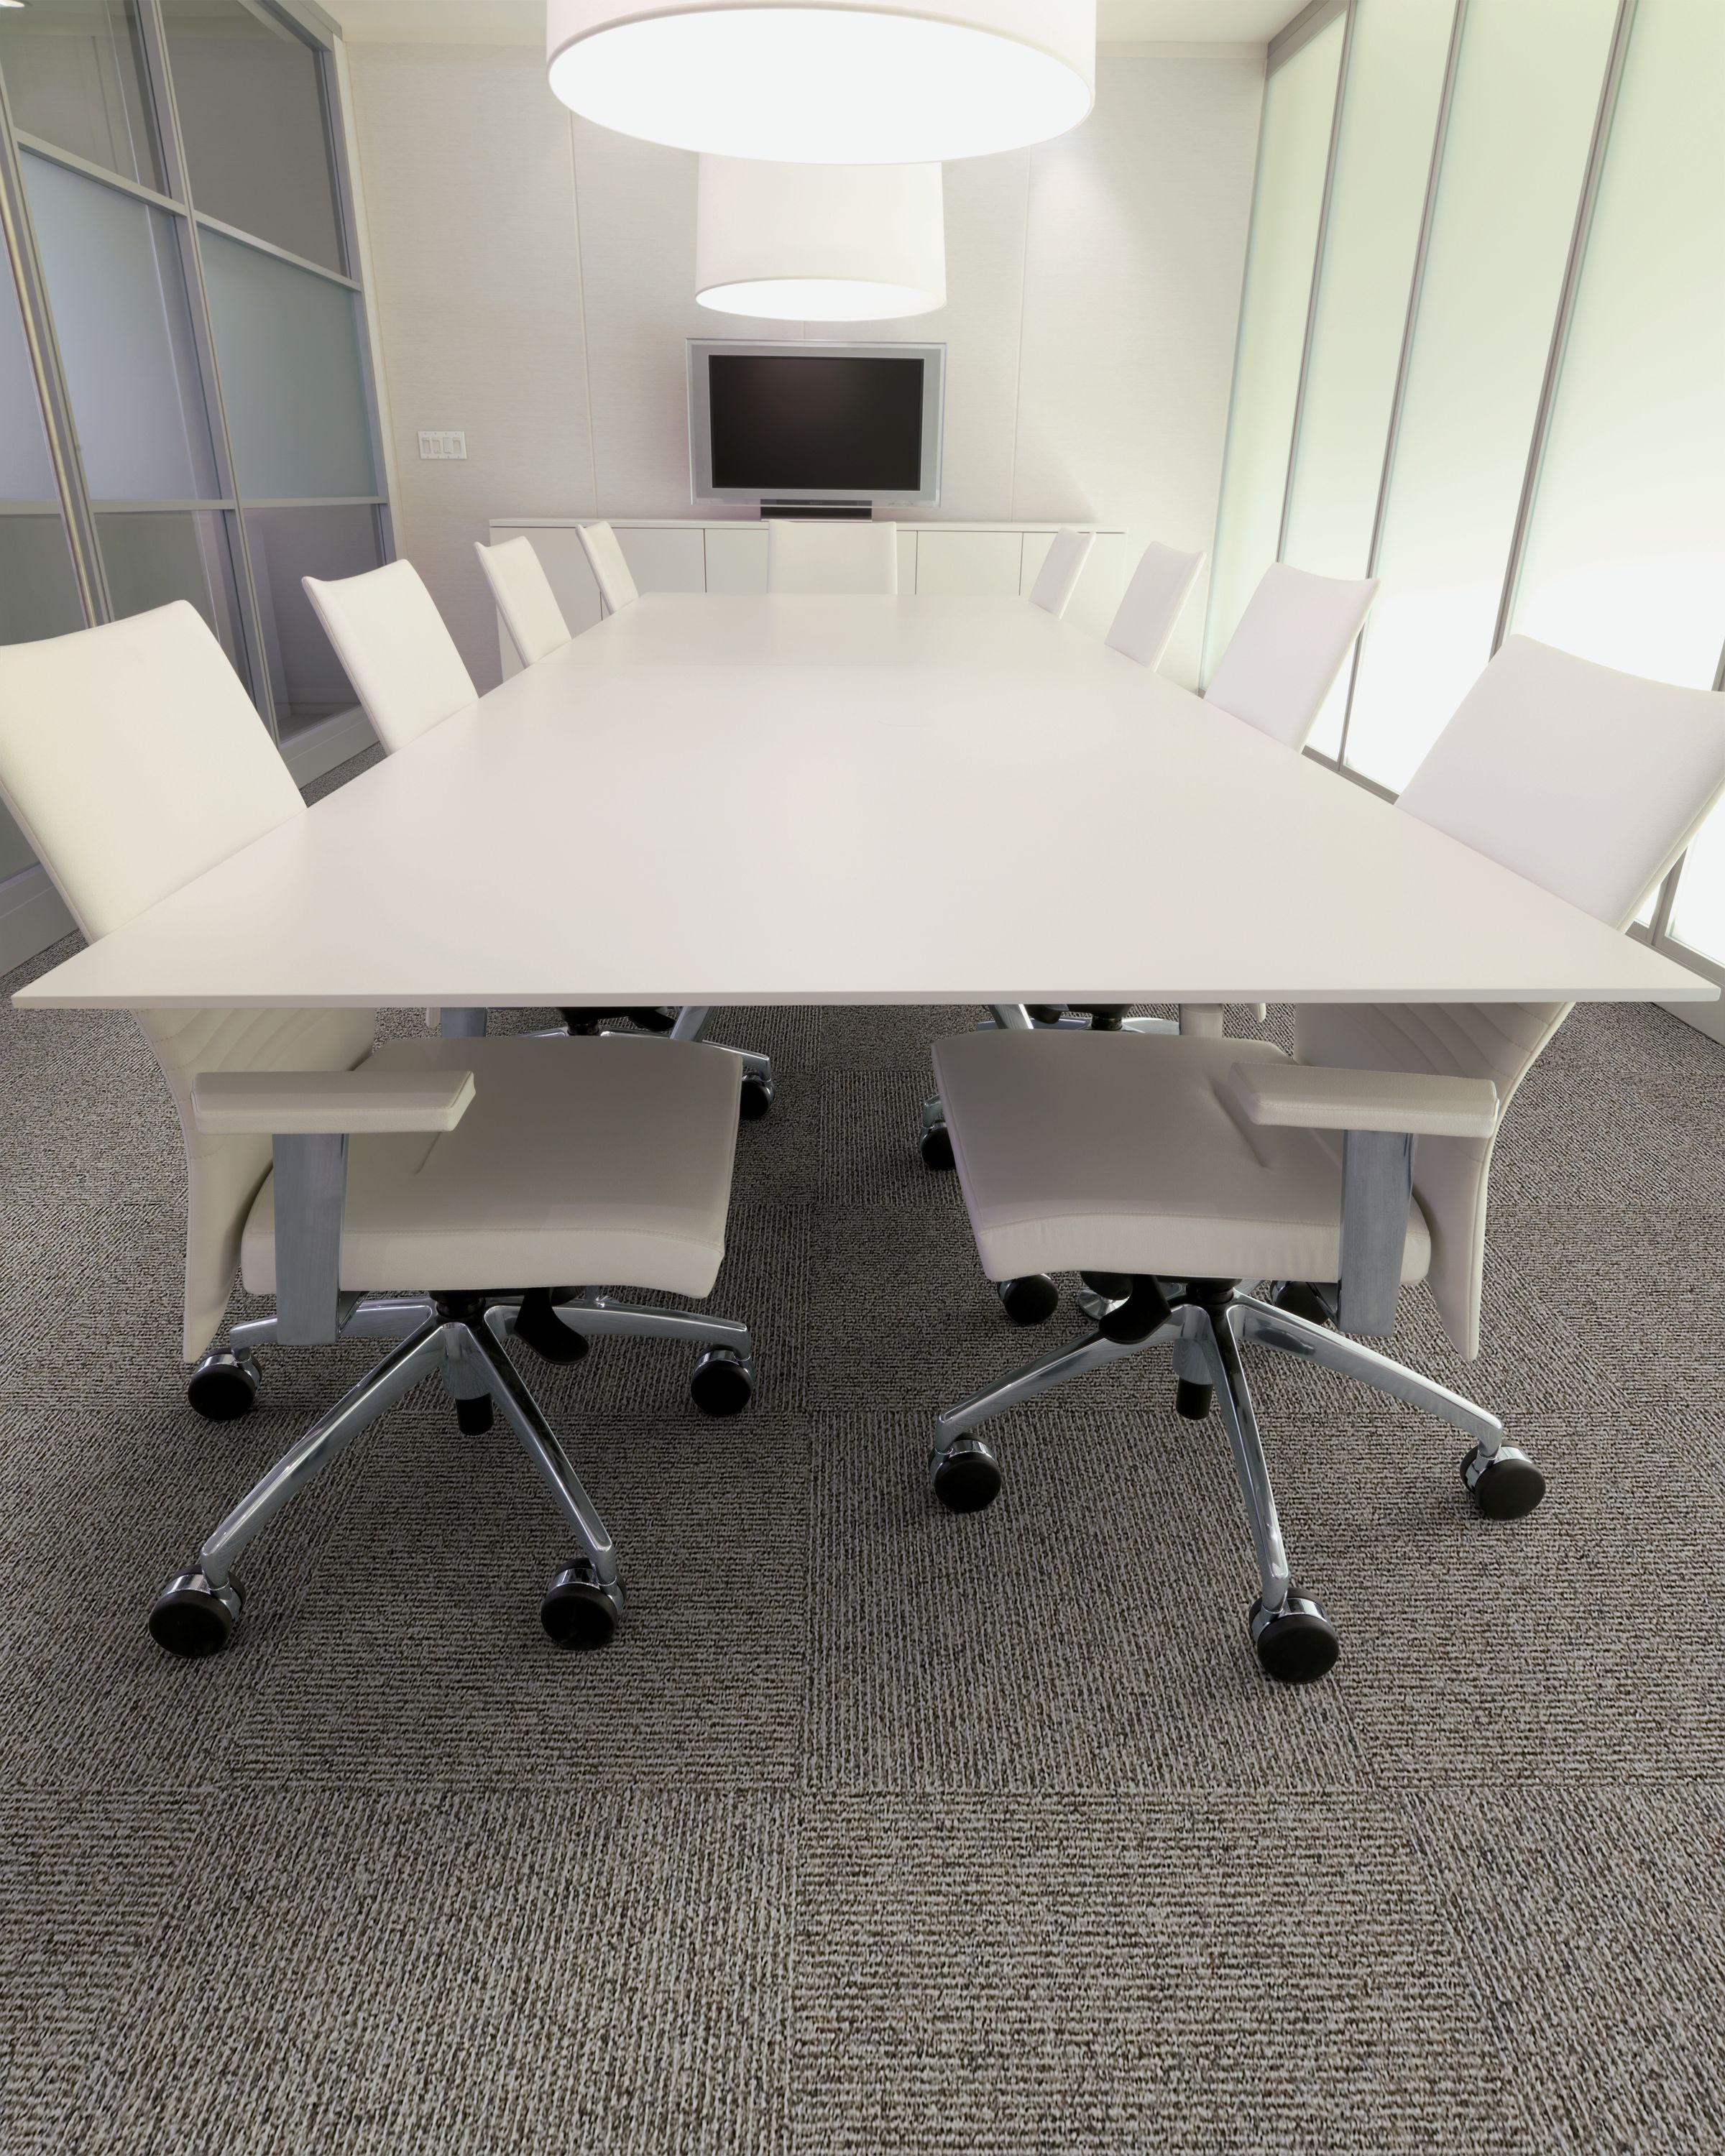 Interface Broomed carpet tile in conference room with long white table and chairs imagen número 4